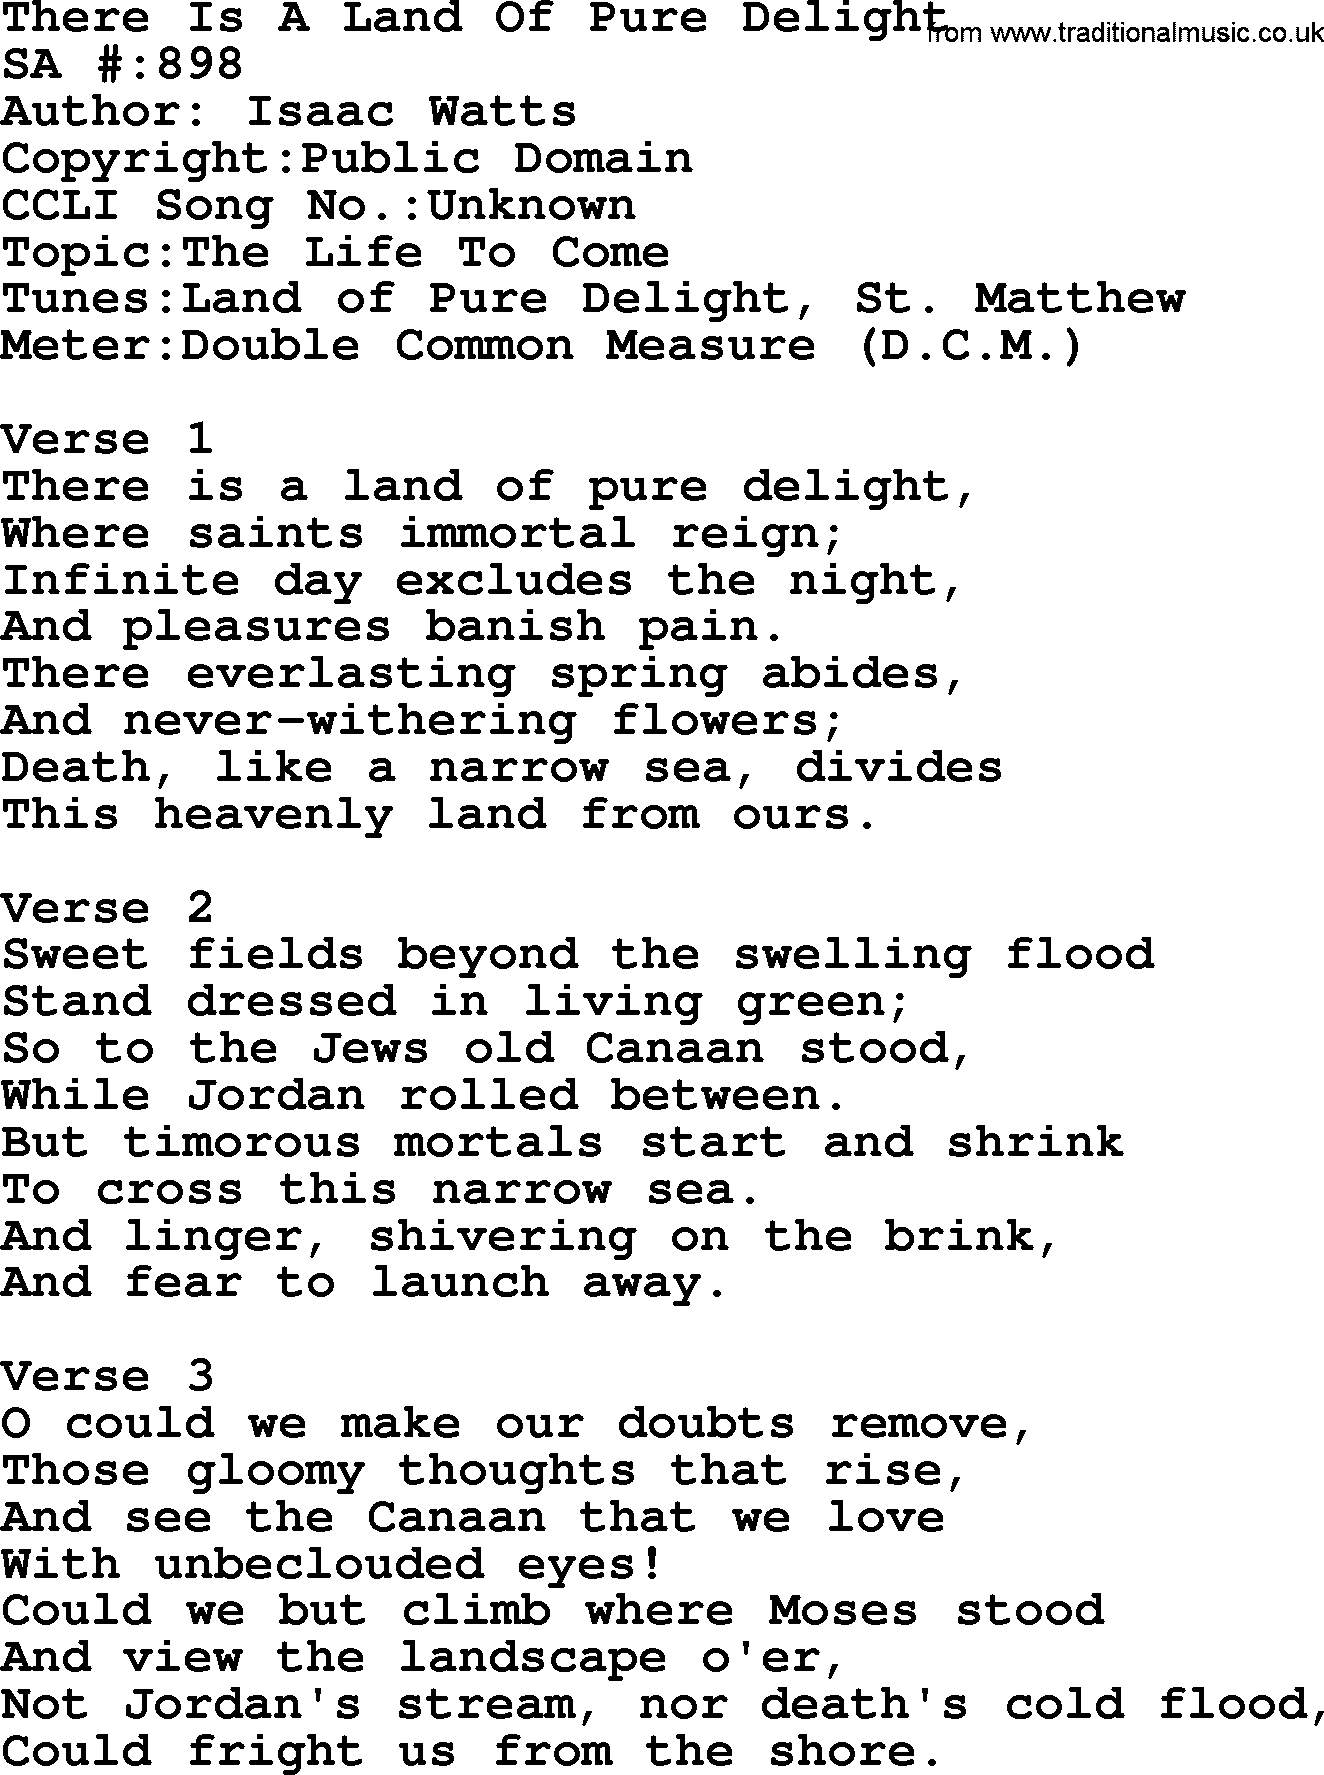 Salvation Army Hymnal, title: There Is A Land Of Pure Delight, with lyrics and PDF,